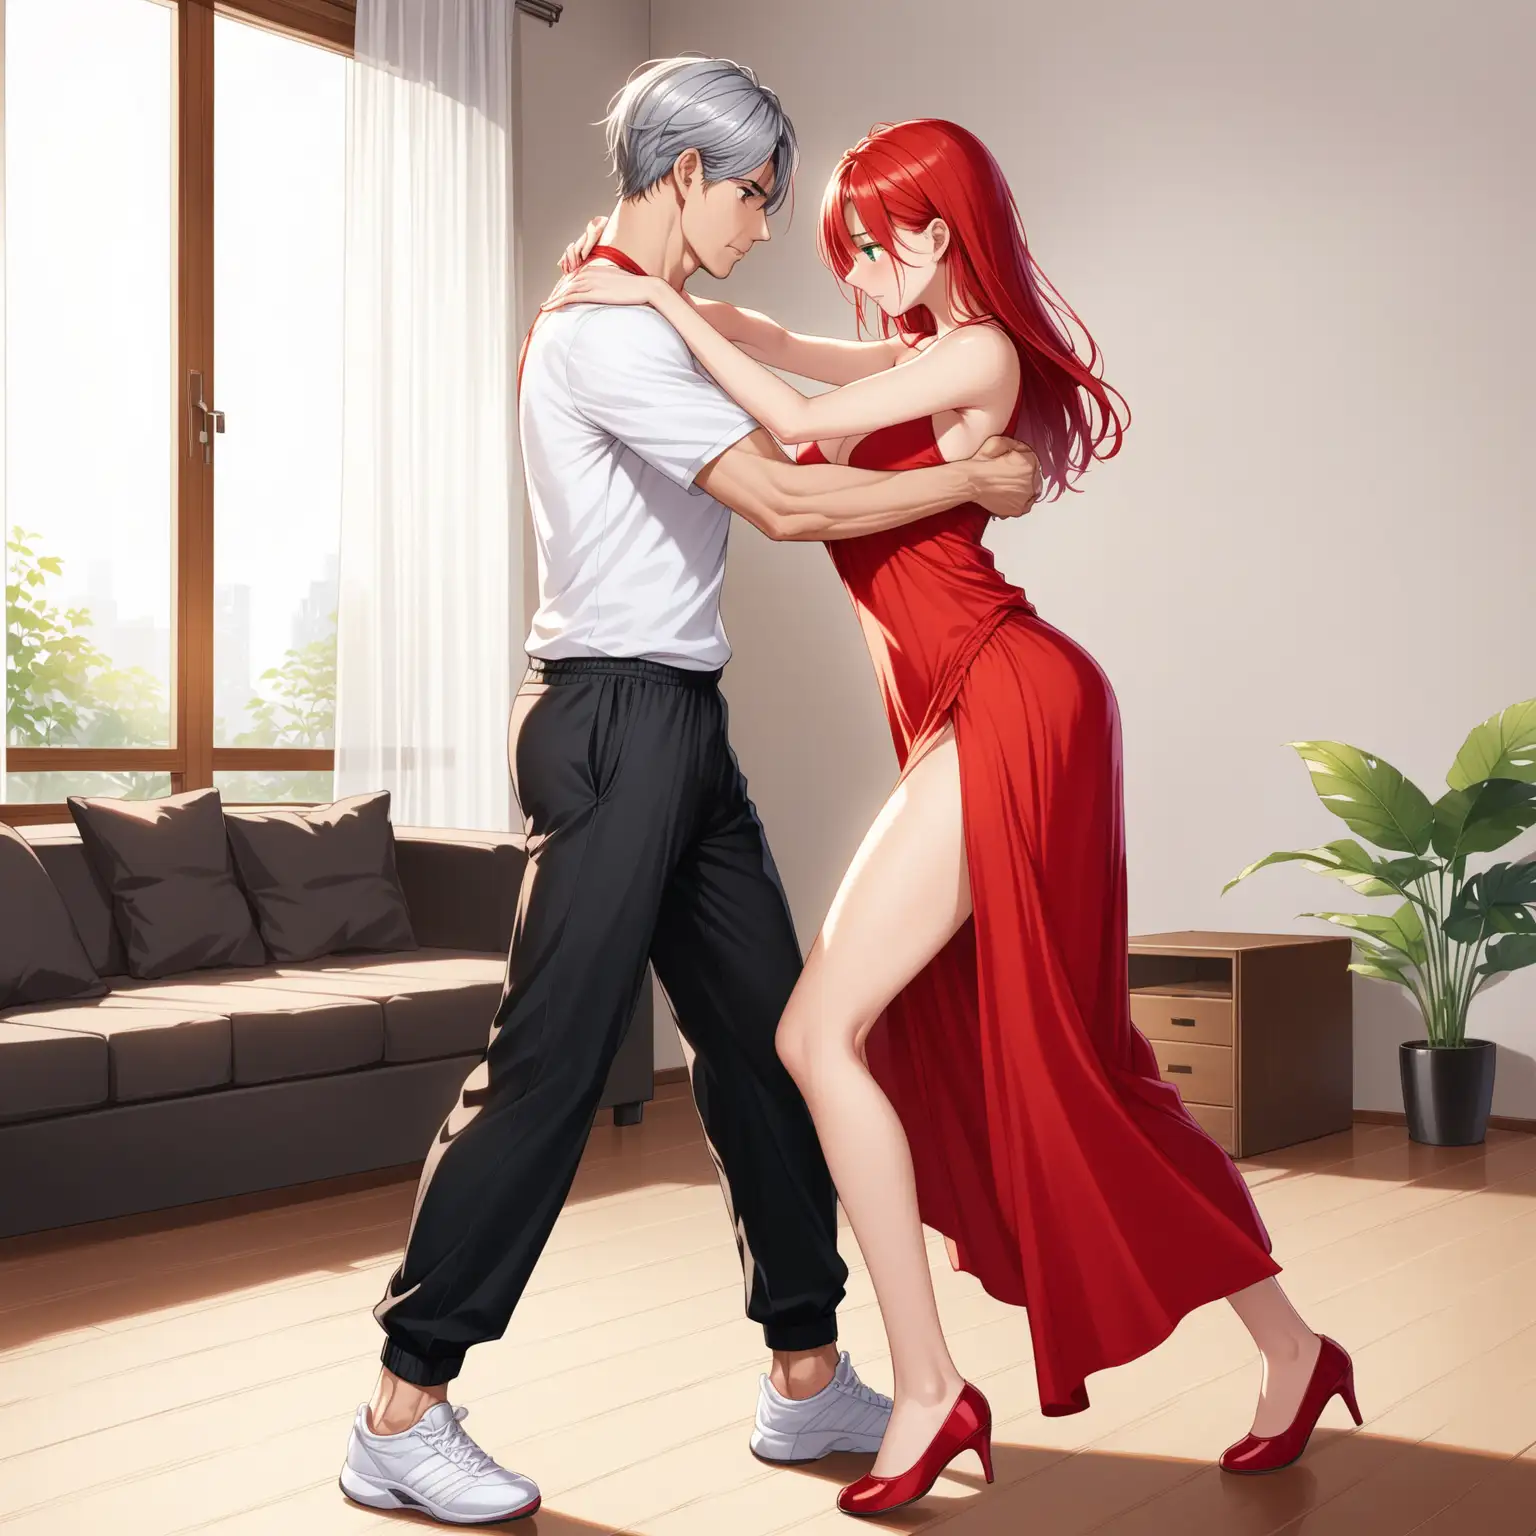 Intimate Dance Passionate Waltz in Cozy Living Room